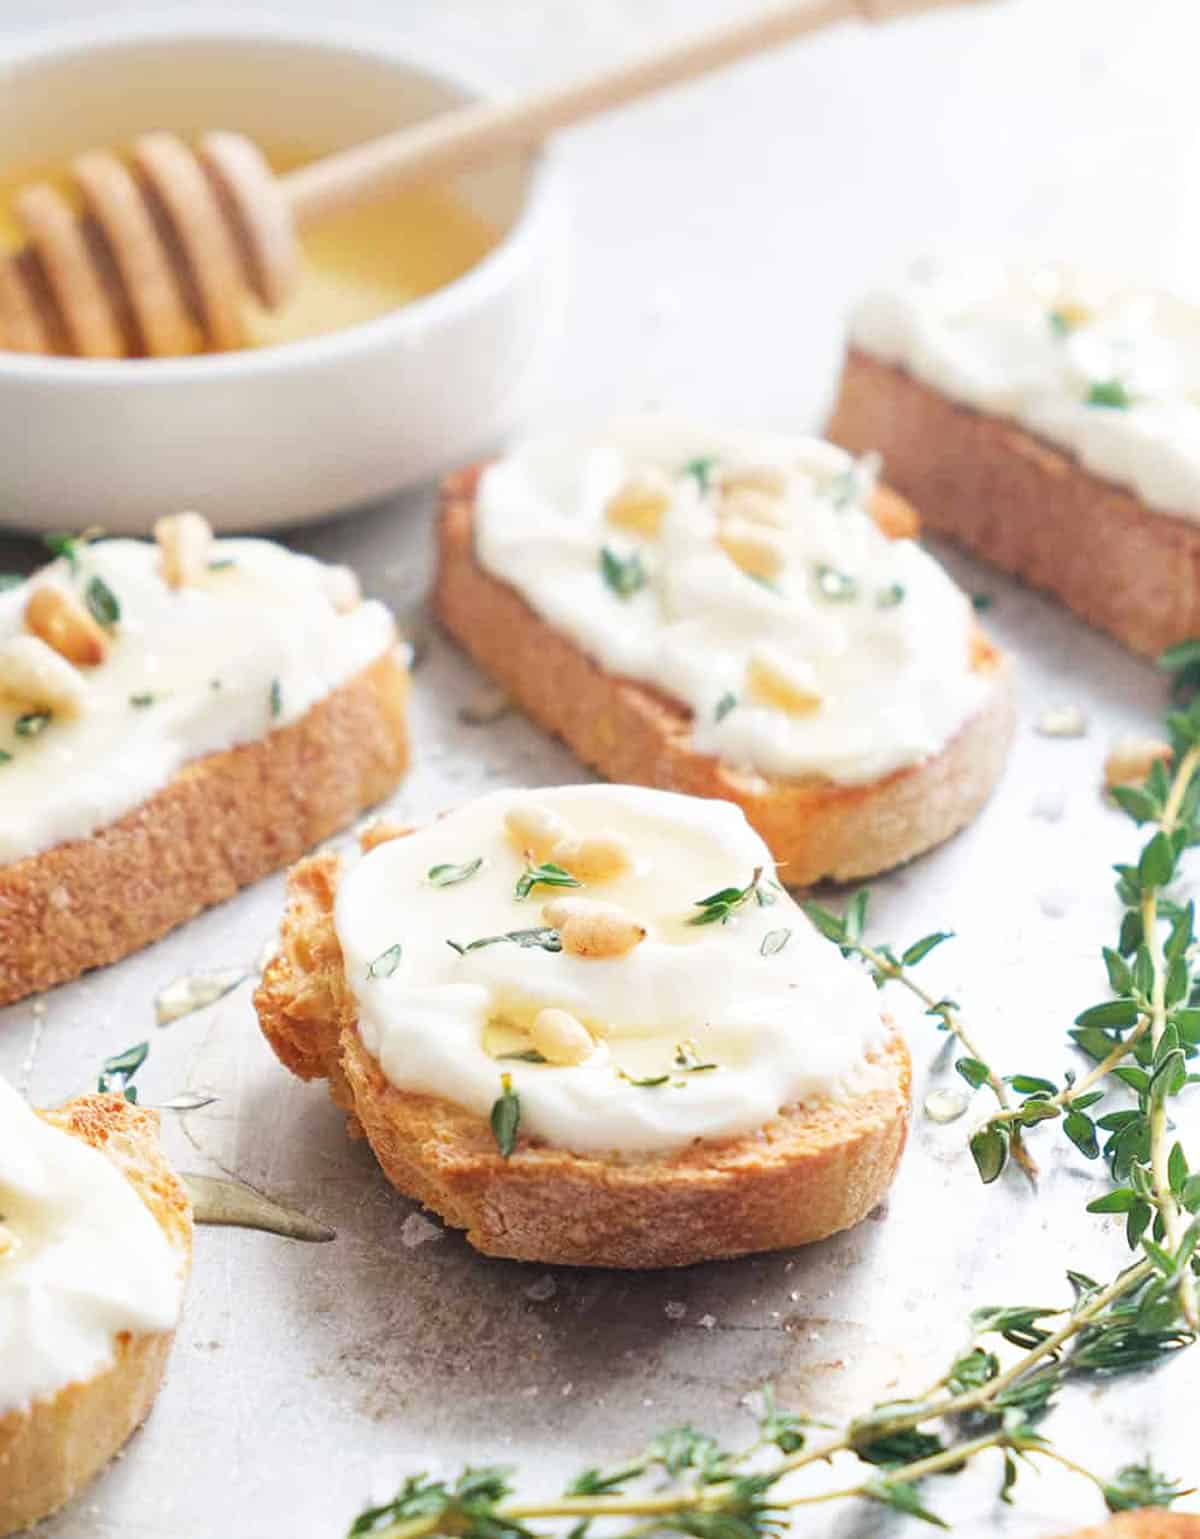 Close-up of an easy ricotta recipe featuring crostini topped with whipped ricotta, pine nuts and honey.